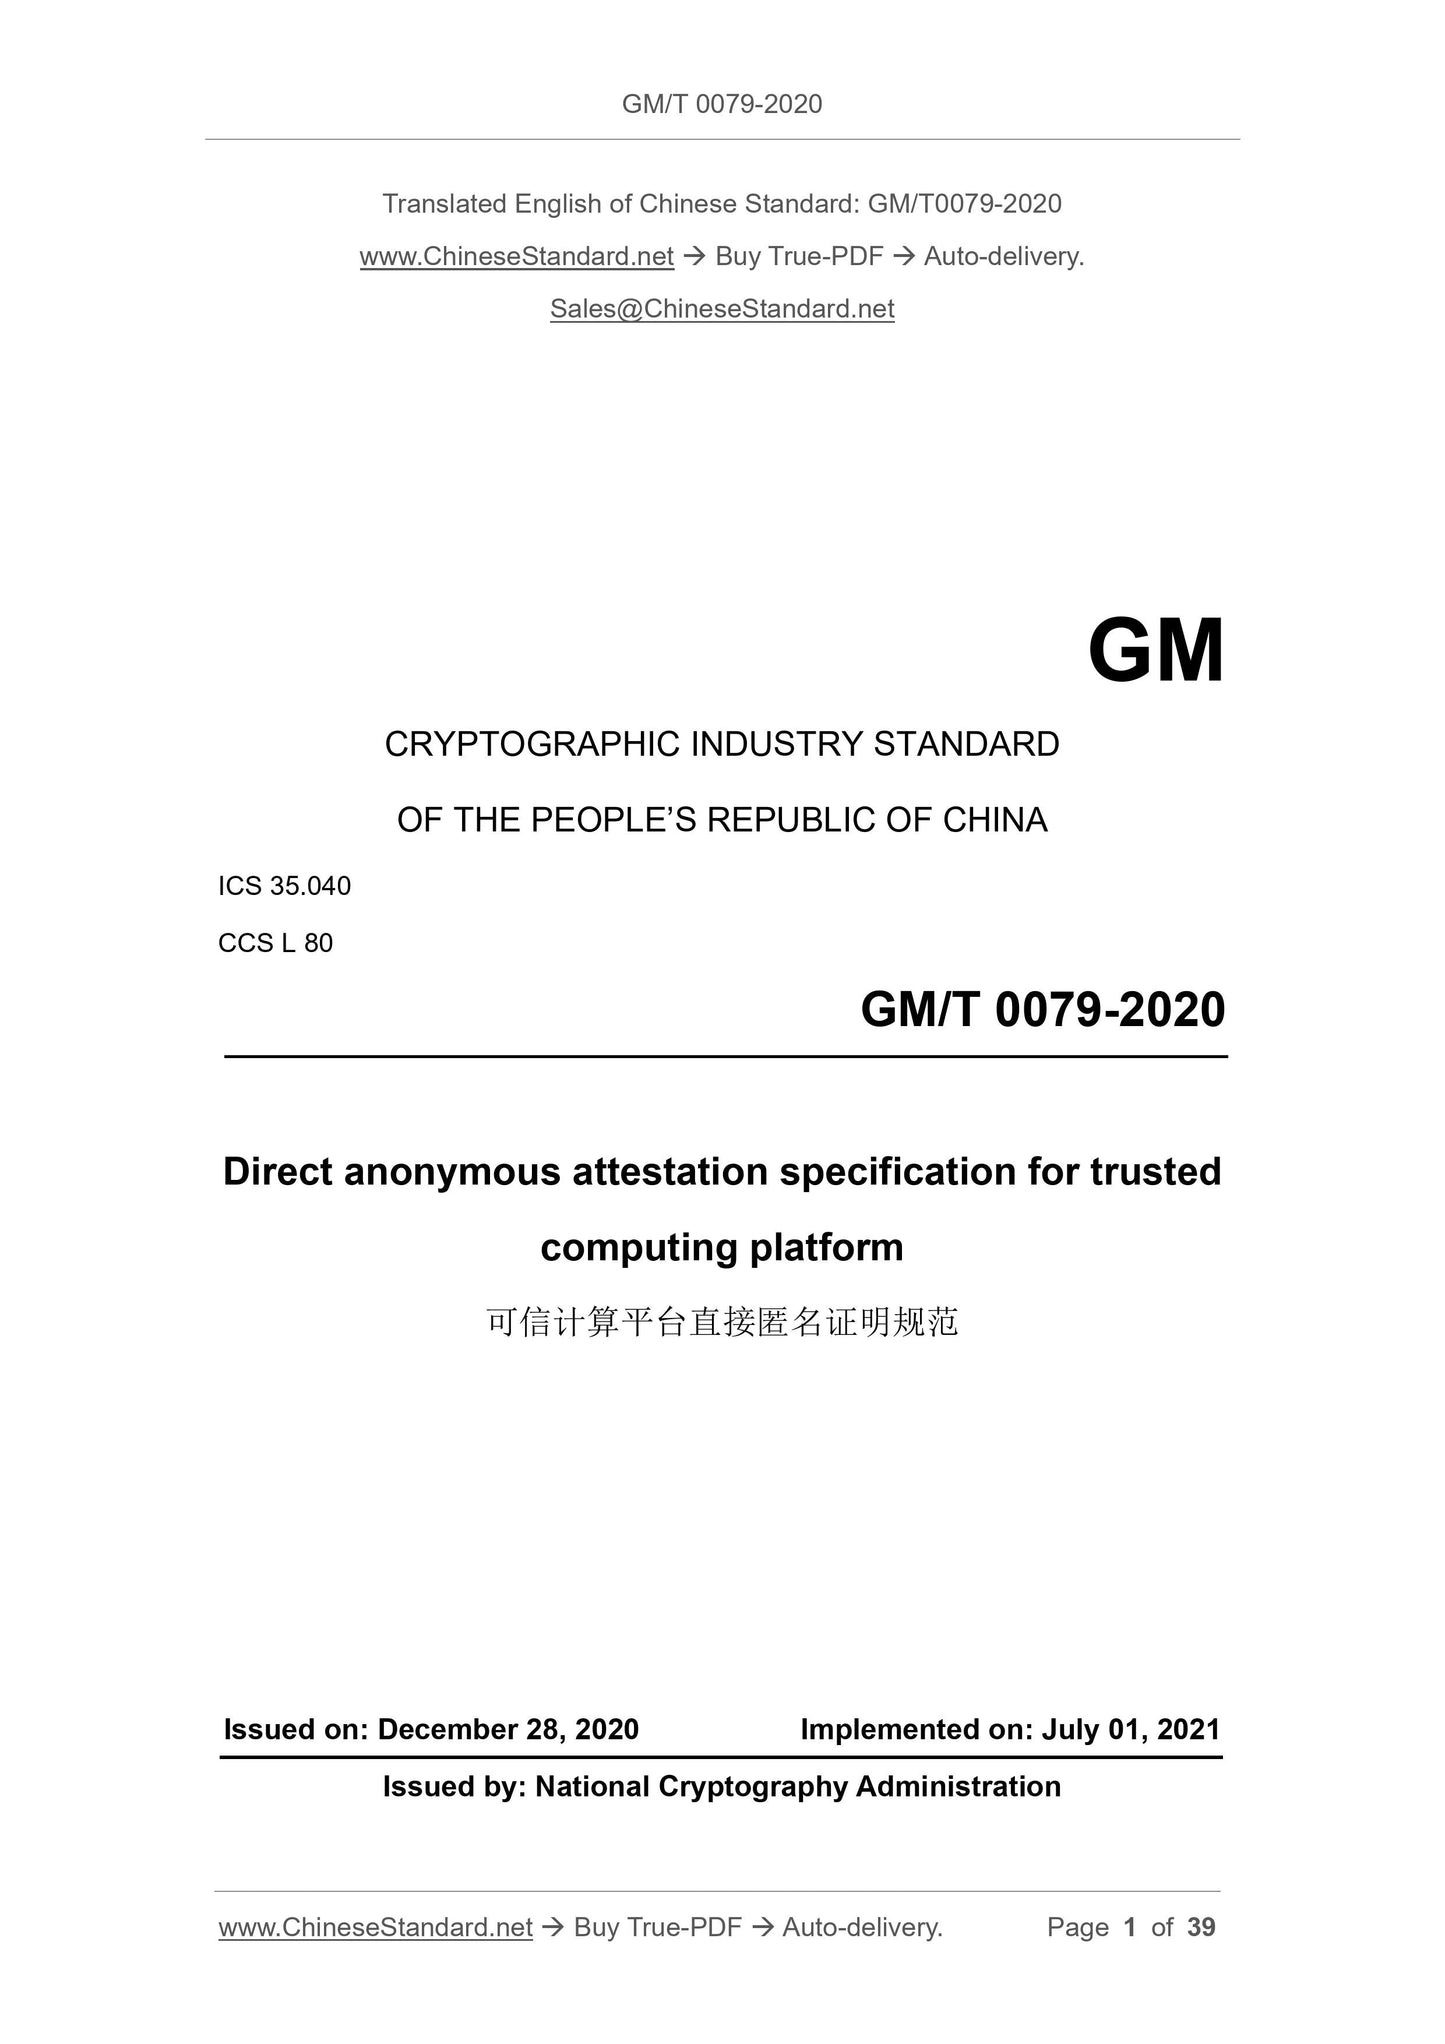 GM/T 0079-2020 Page 1